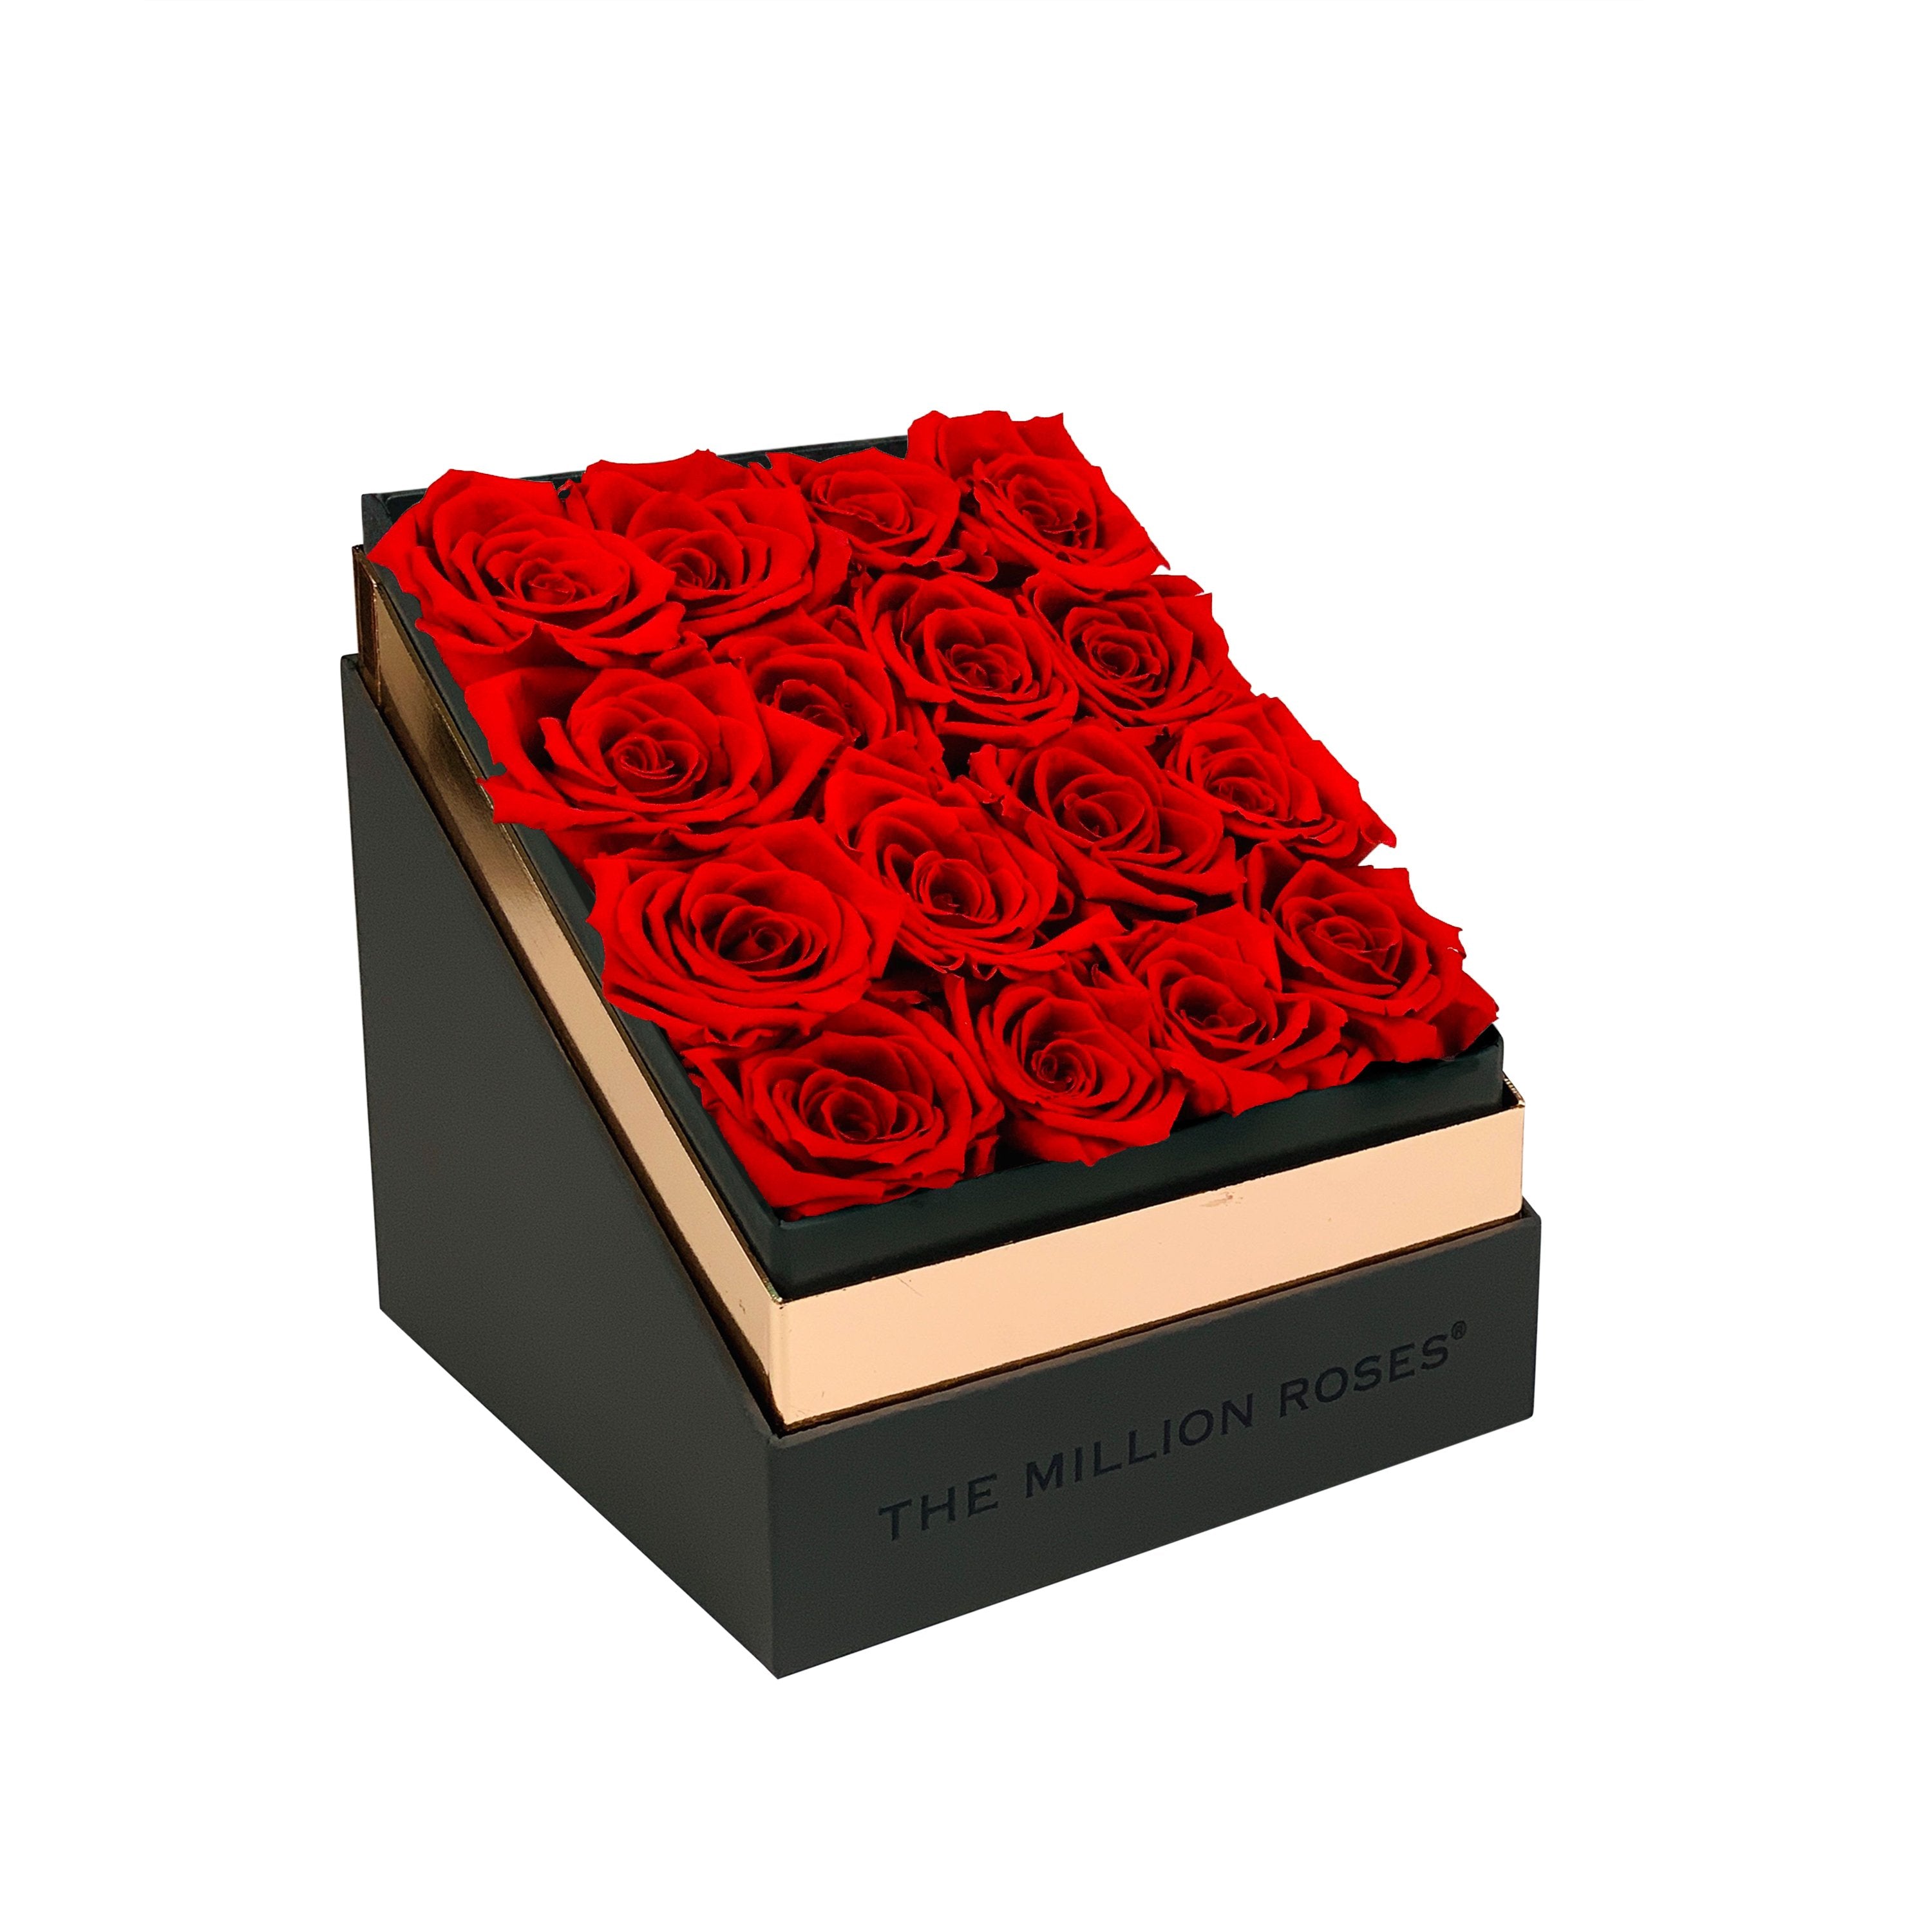 The Square - Gray Box - Red Roses